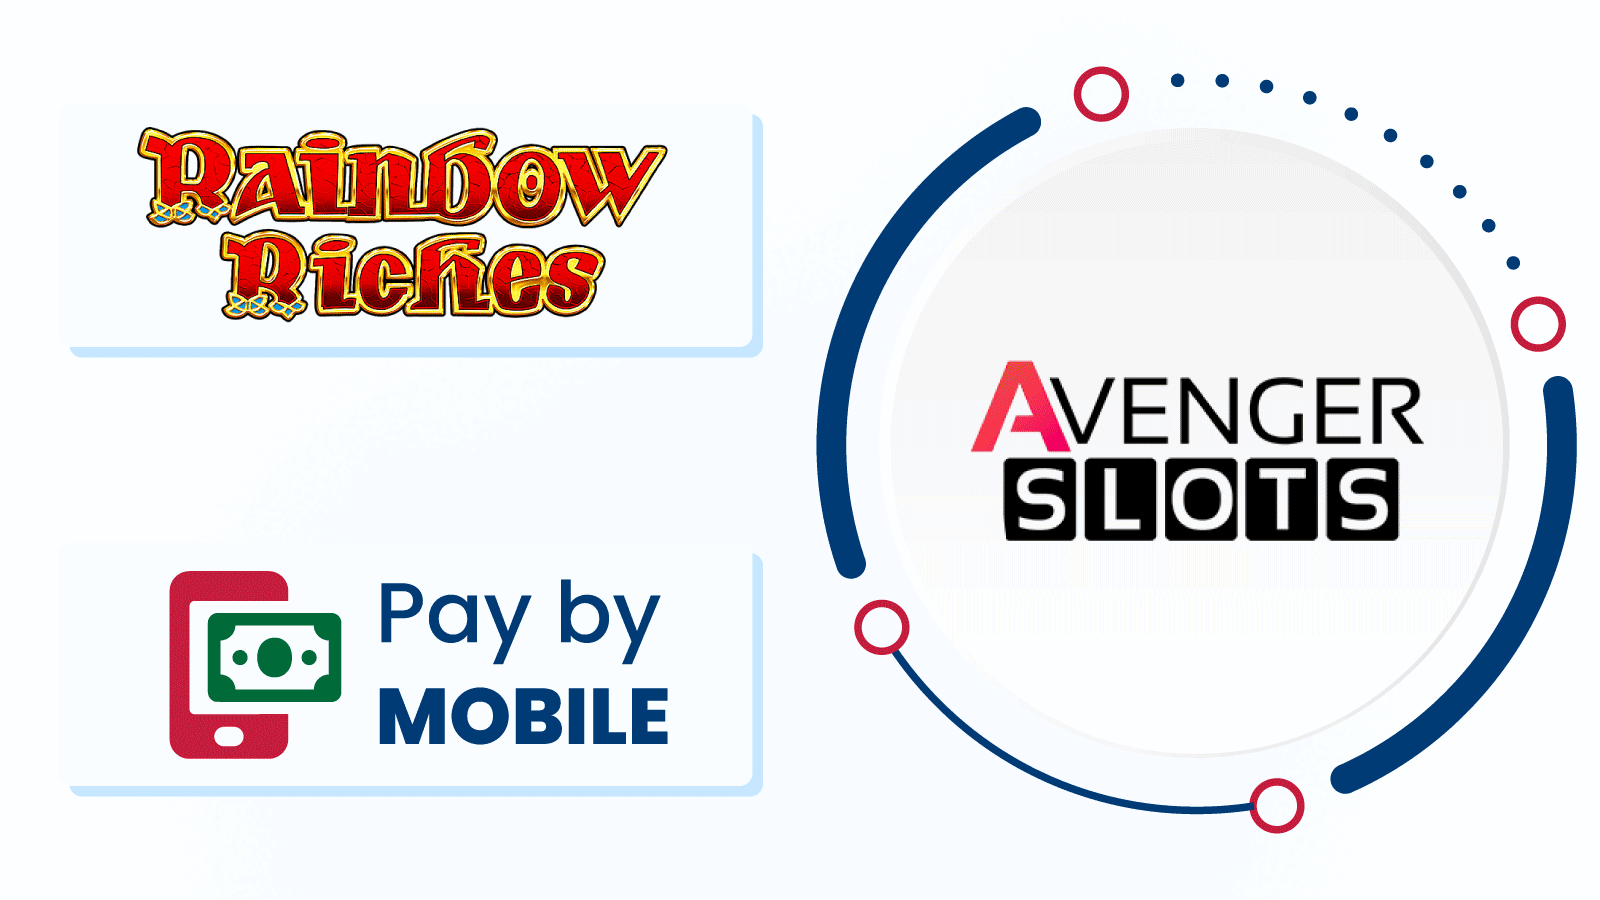 Where to Play Rainbow Riches & Pay By Mobile